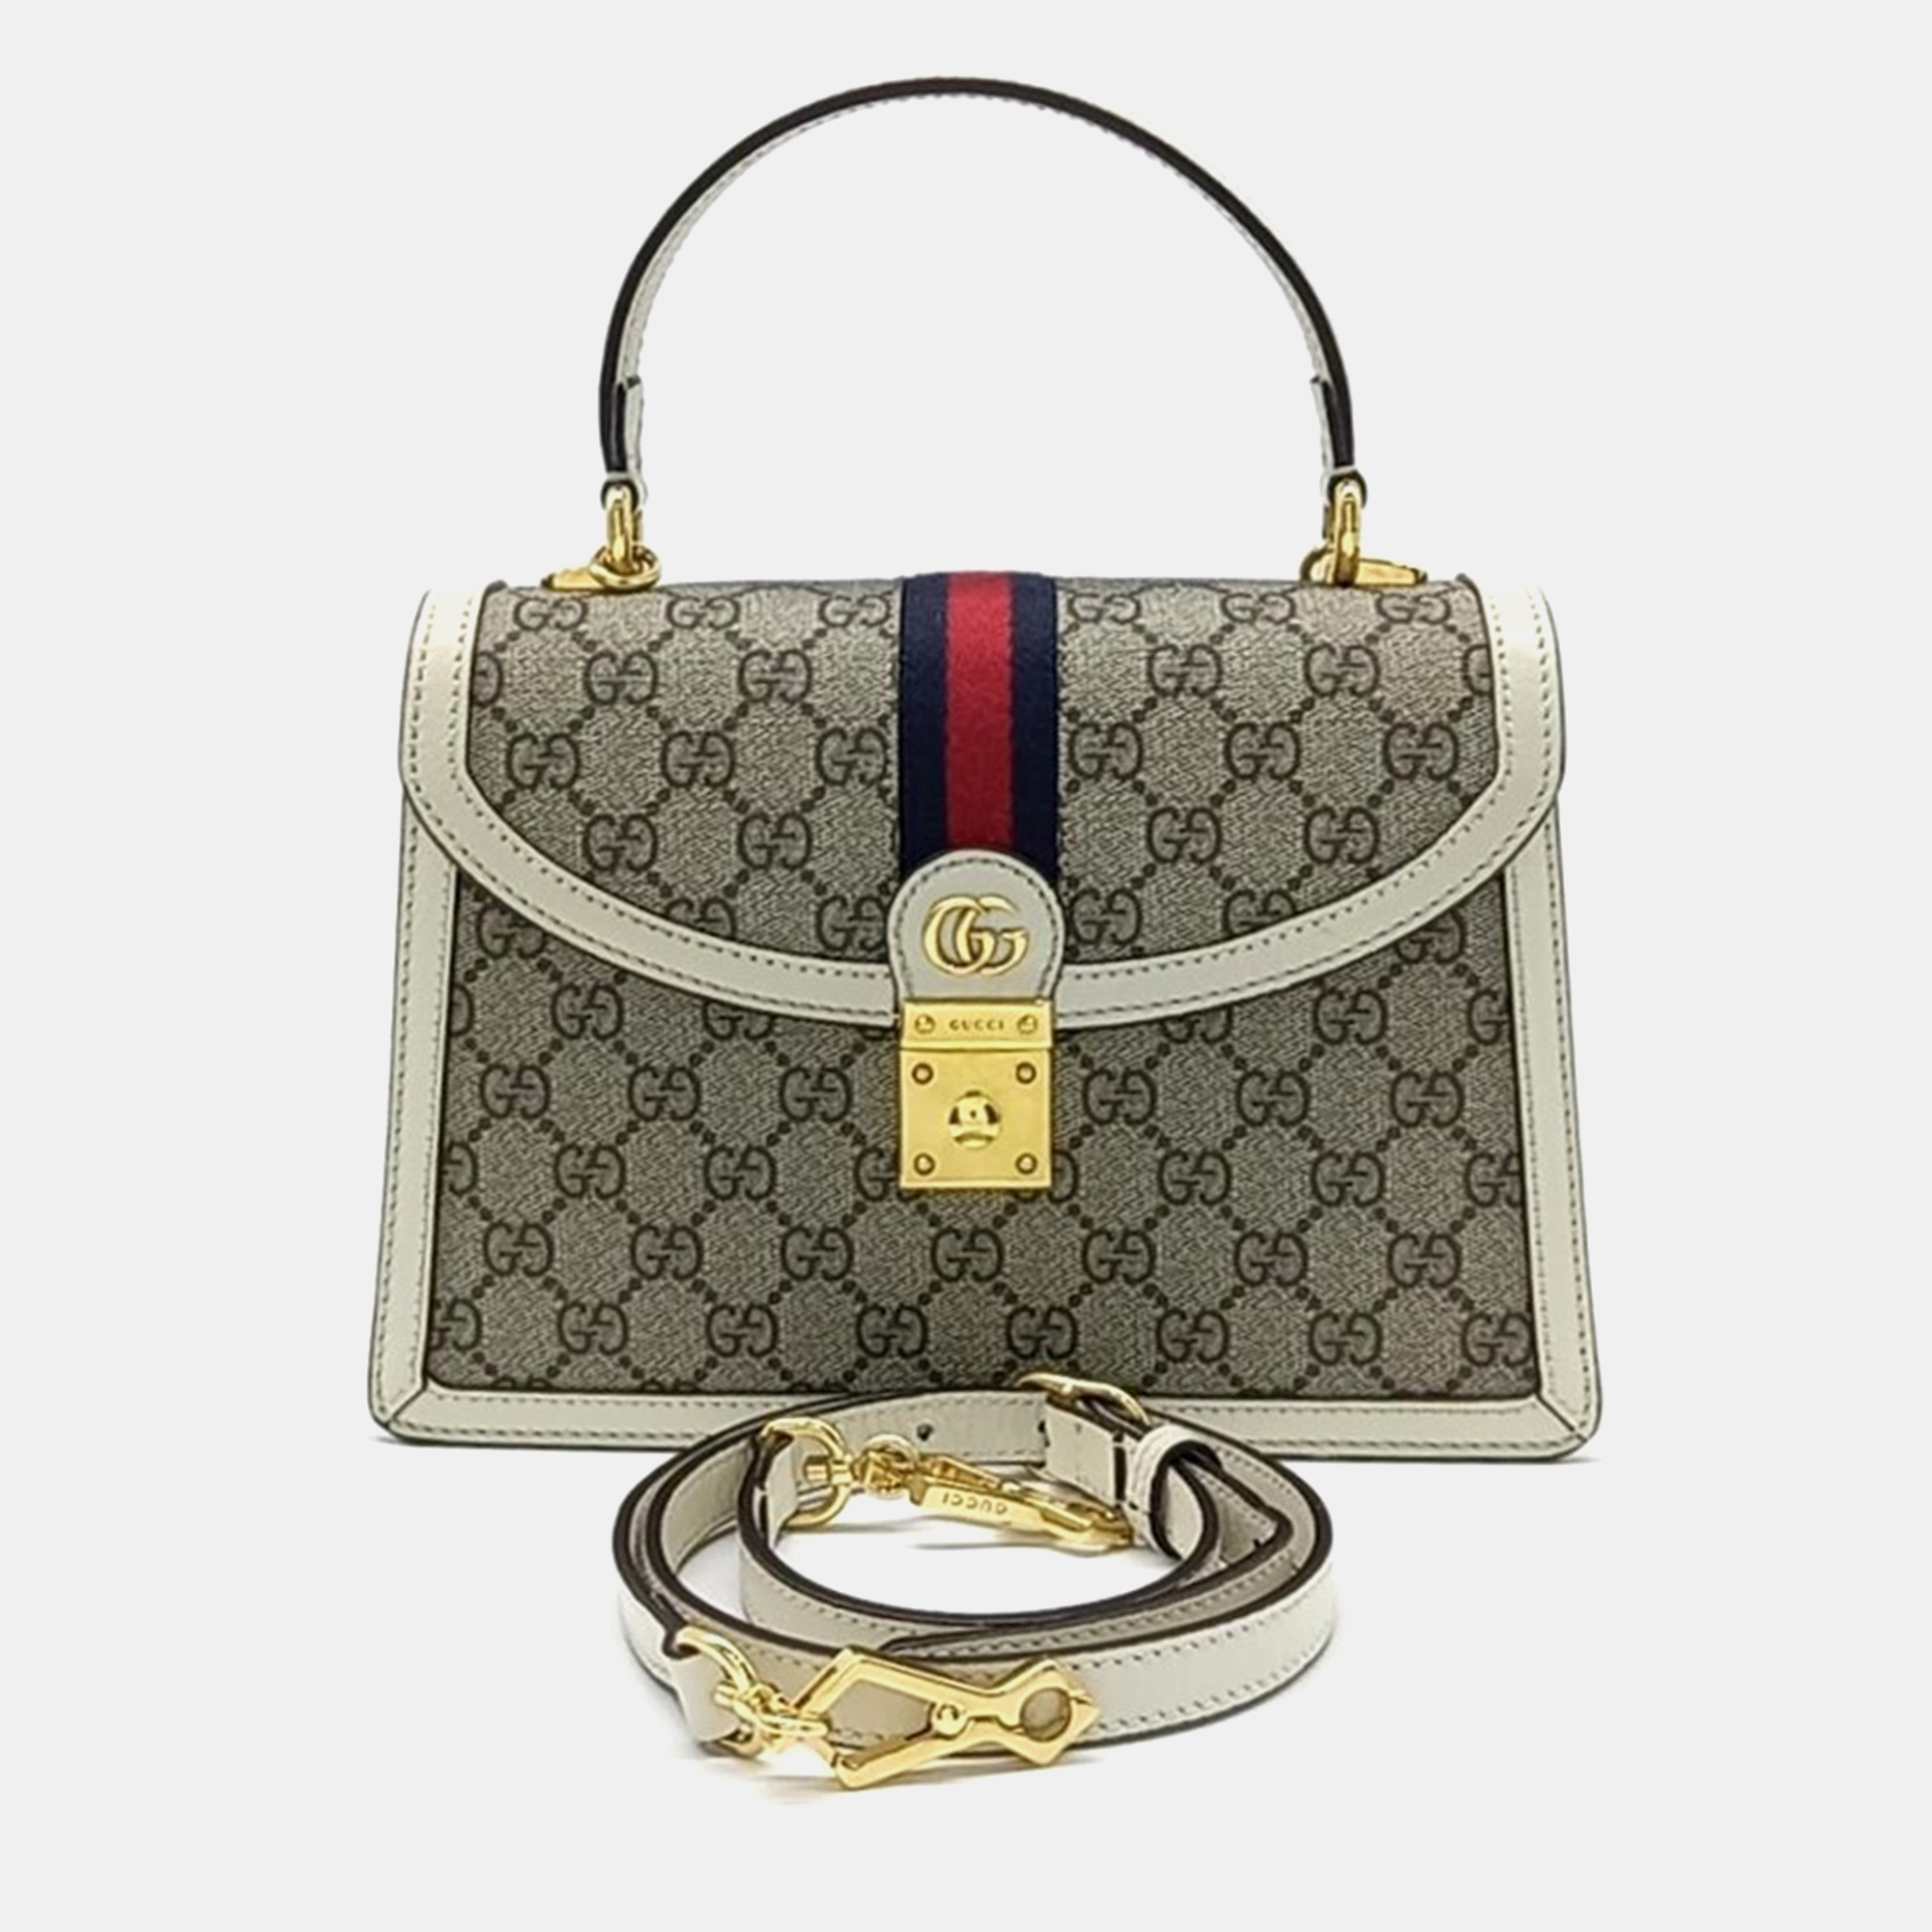 Gucci ophidia top handle bag